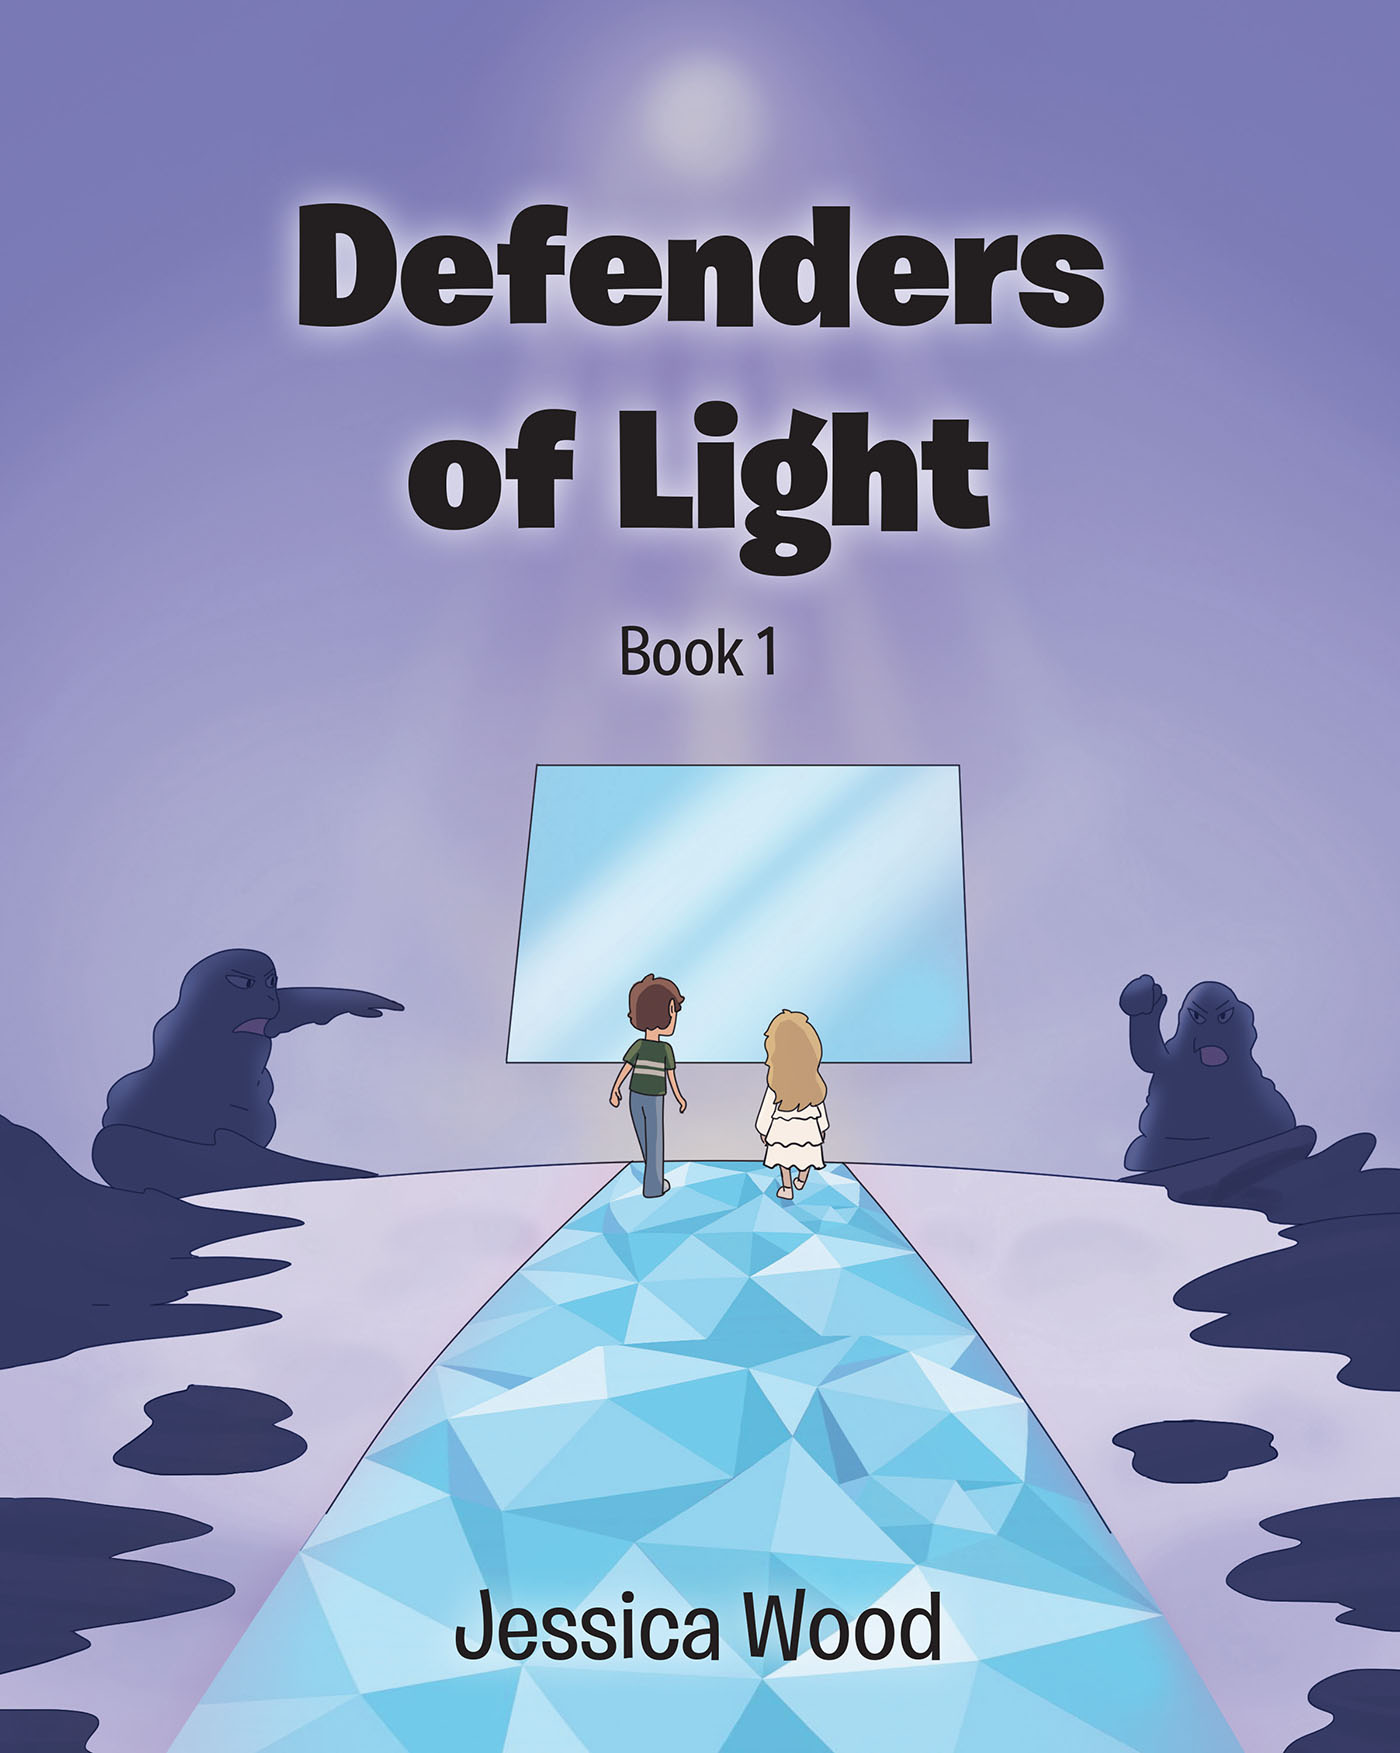 Jessica Wood’s Newly Released "Defenders of Light Series Book 1" is an Imaginative Juvenile Fiction with Layers of Faith and Fantasy